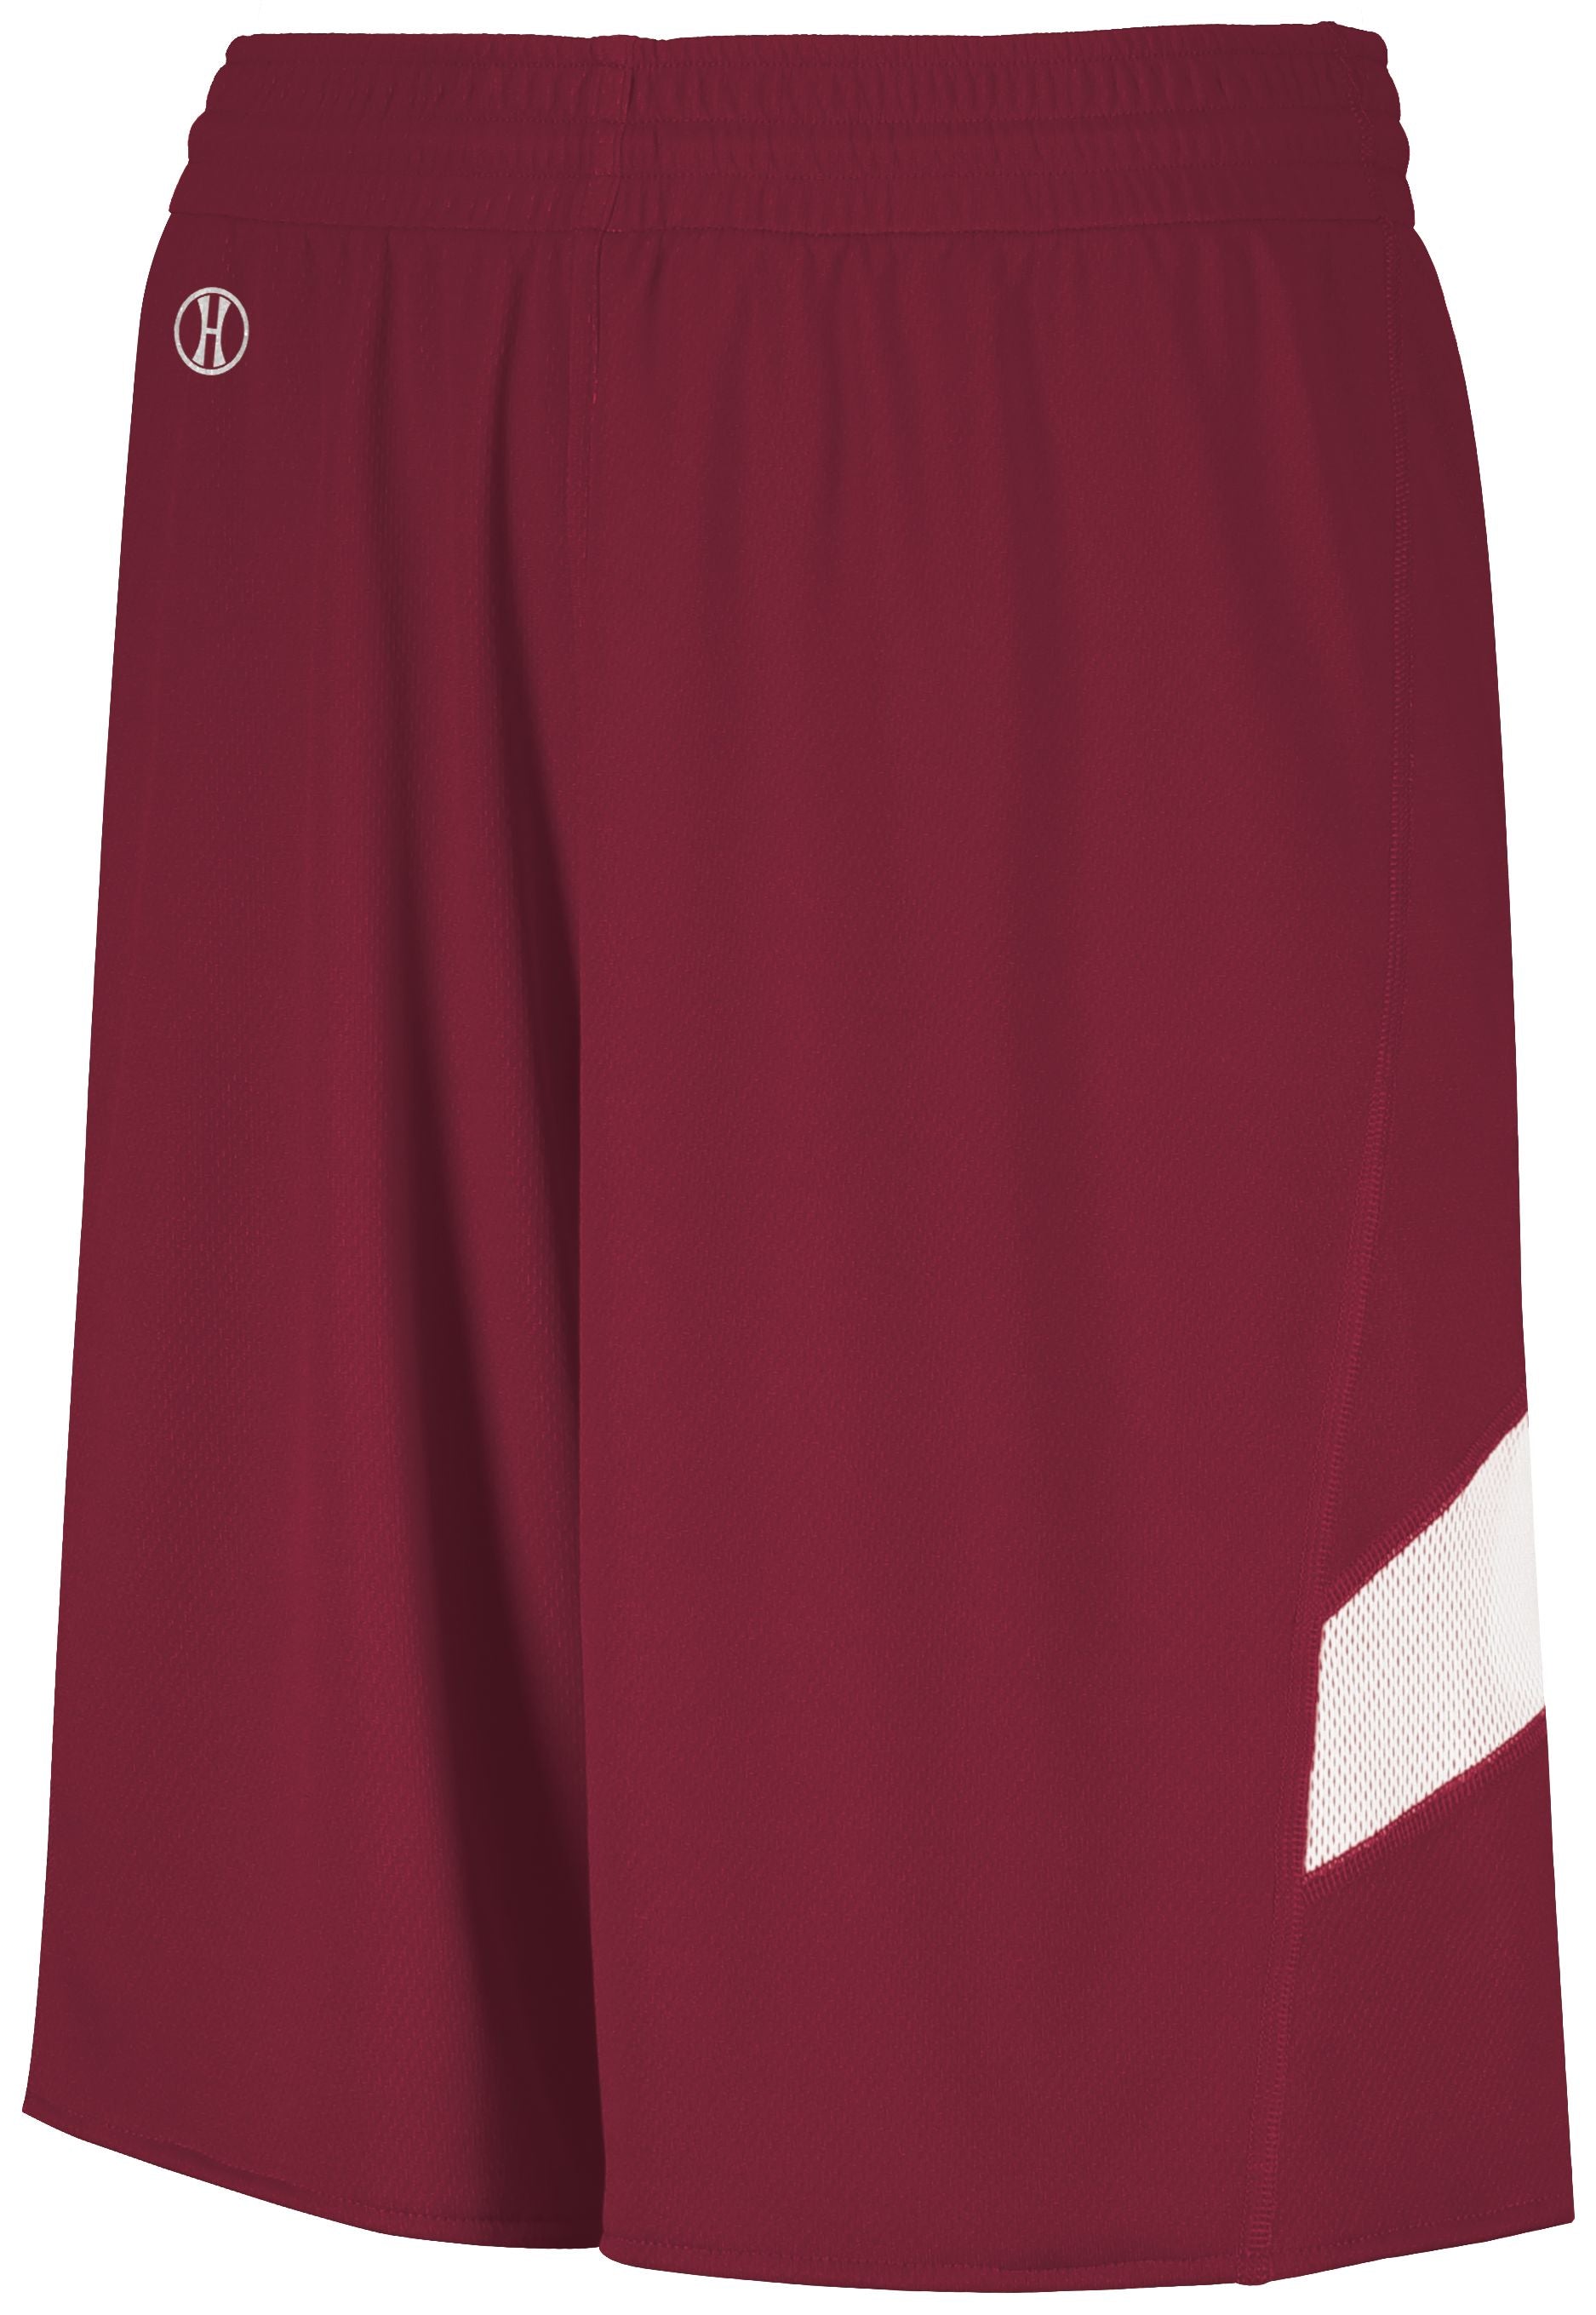 Holloway Dual-Side Single Ply Shorts in Cardinal/White  -Part of the Adult, Adult-Shorts, Basketball, Holloway, All-Sports, All-Sports-1 product lines at KanaleyCreations.com